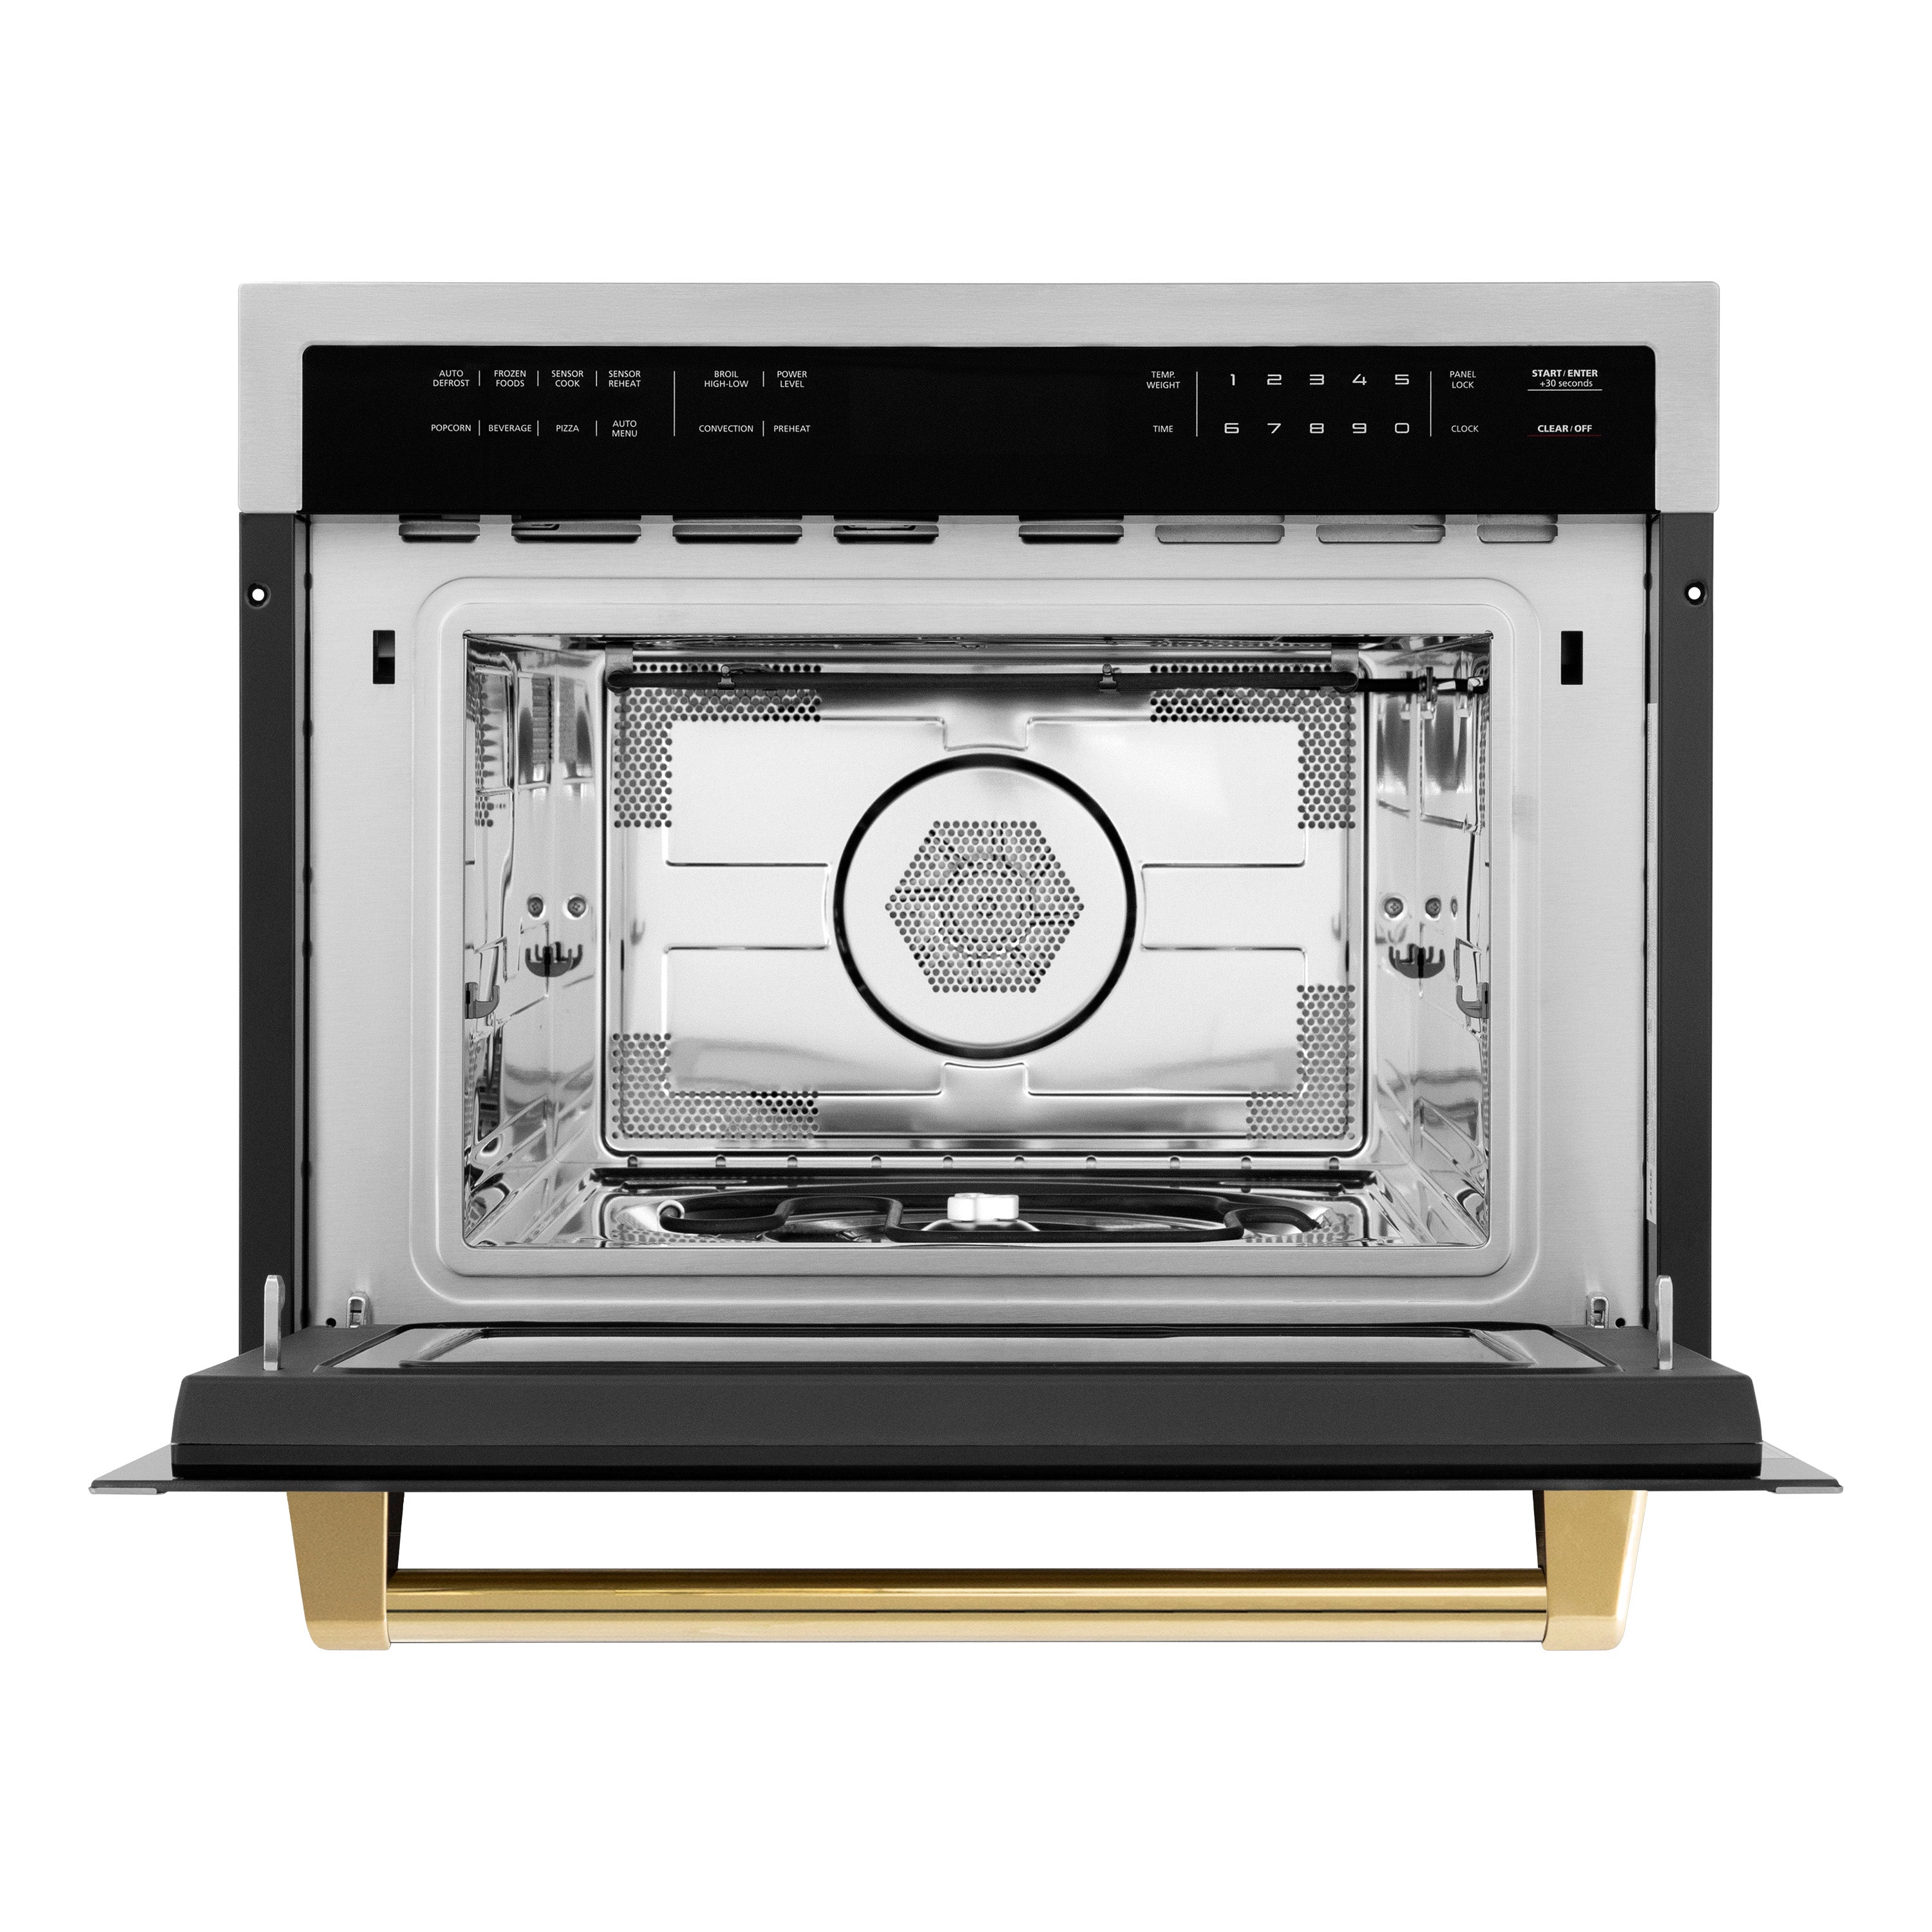 ZLINE Autograph Edition 24 in. 1.6 cu ft. Built-in Convection Microwave Oven in Stainless Steel with Polished Gold Accents (MWOZ-24-G)